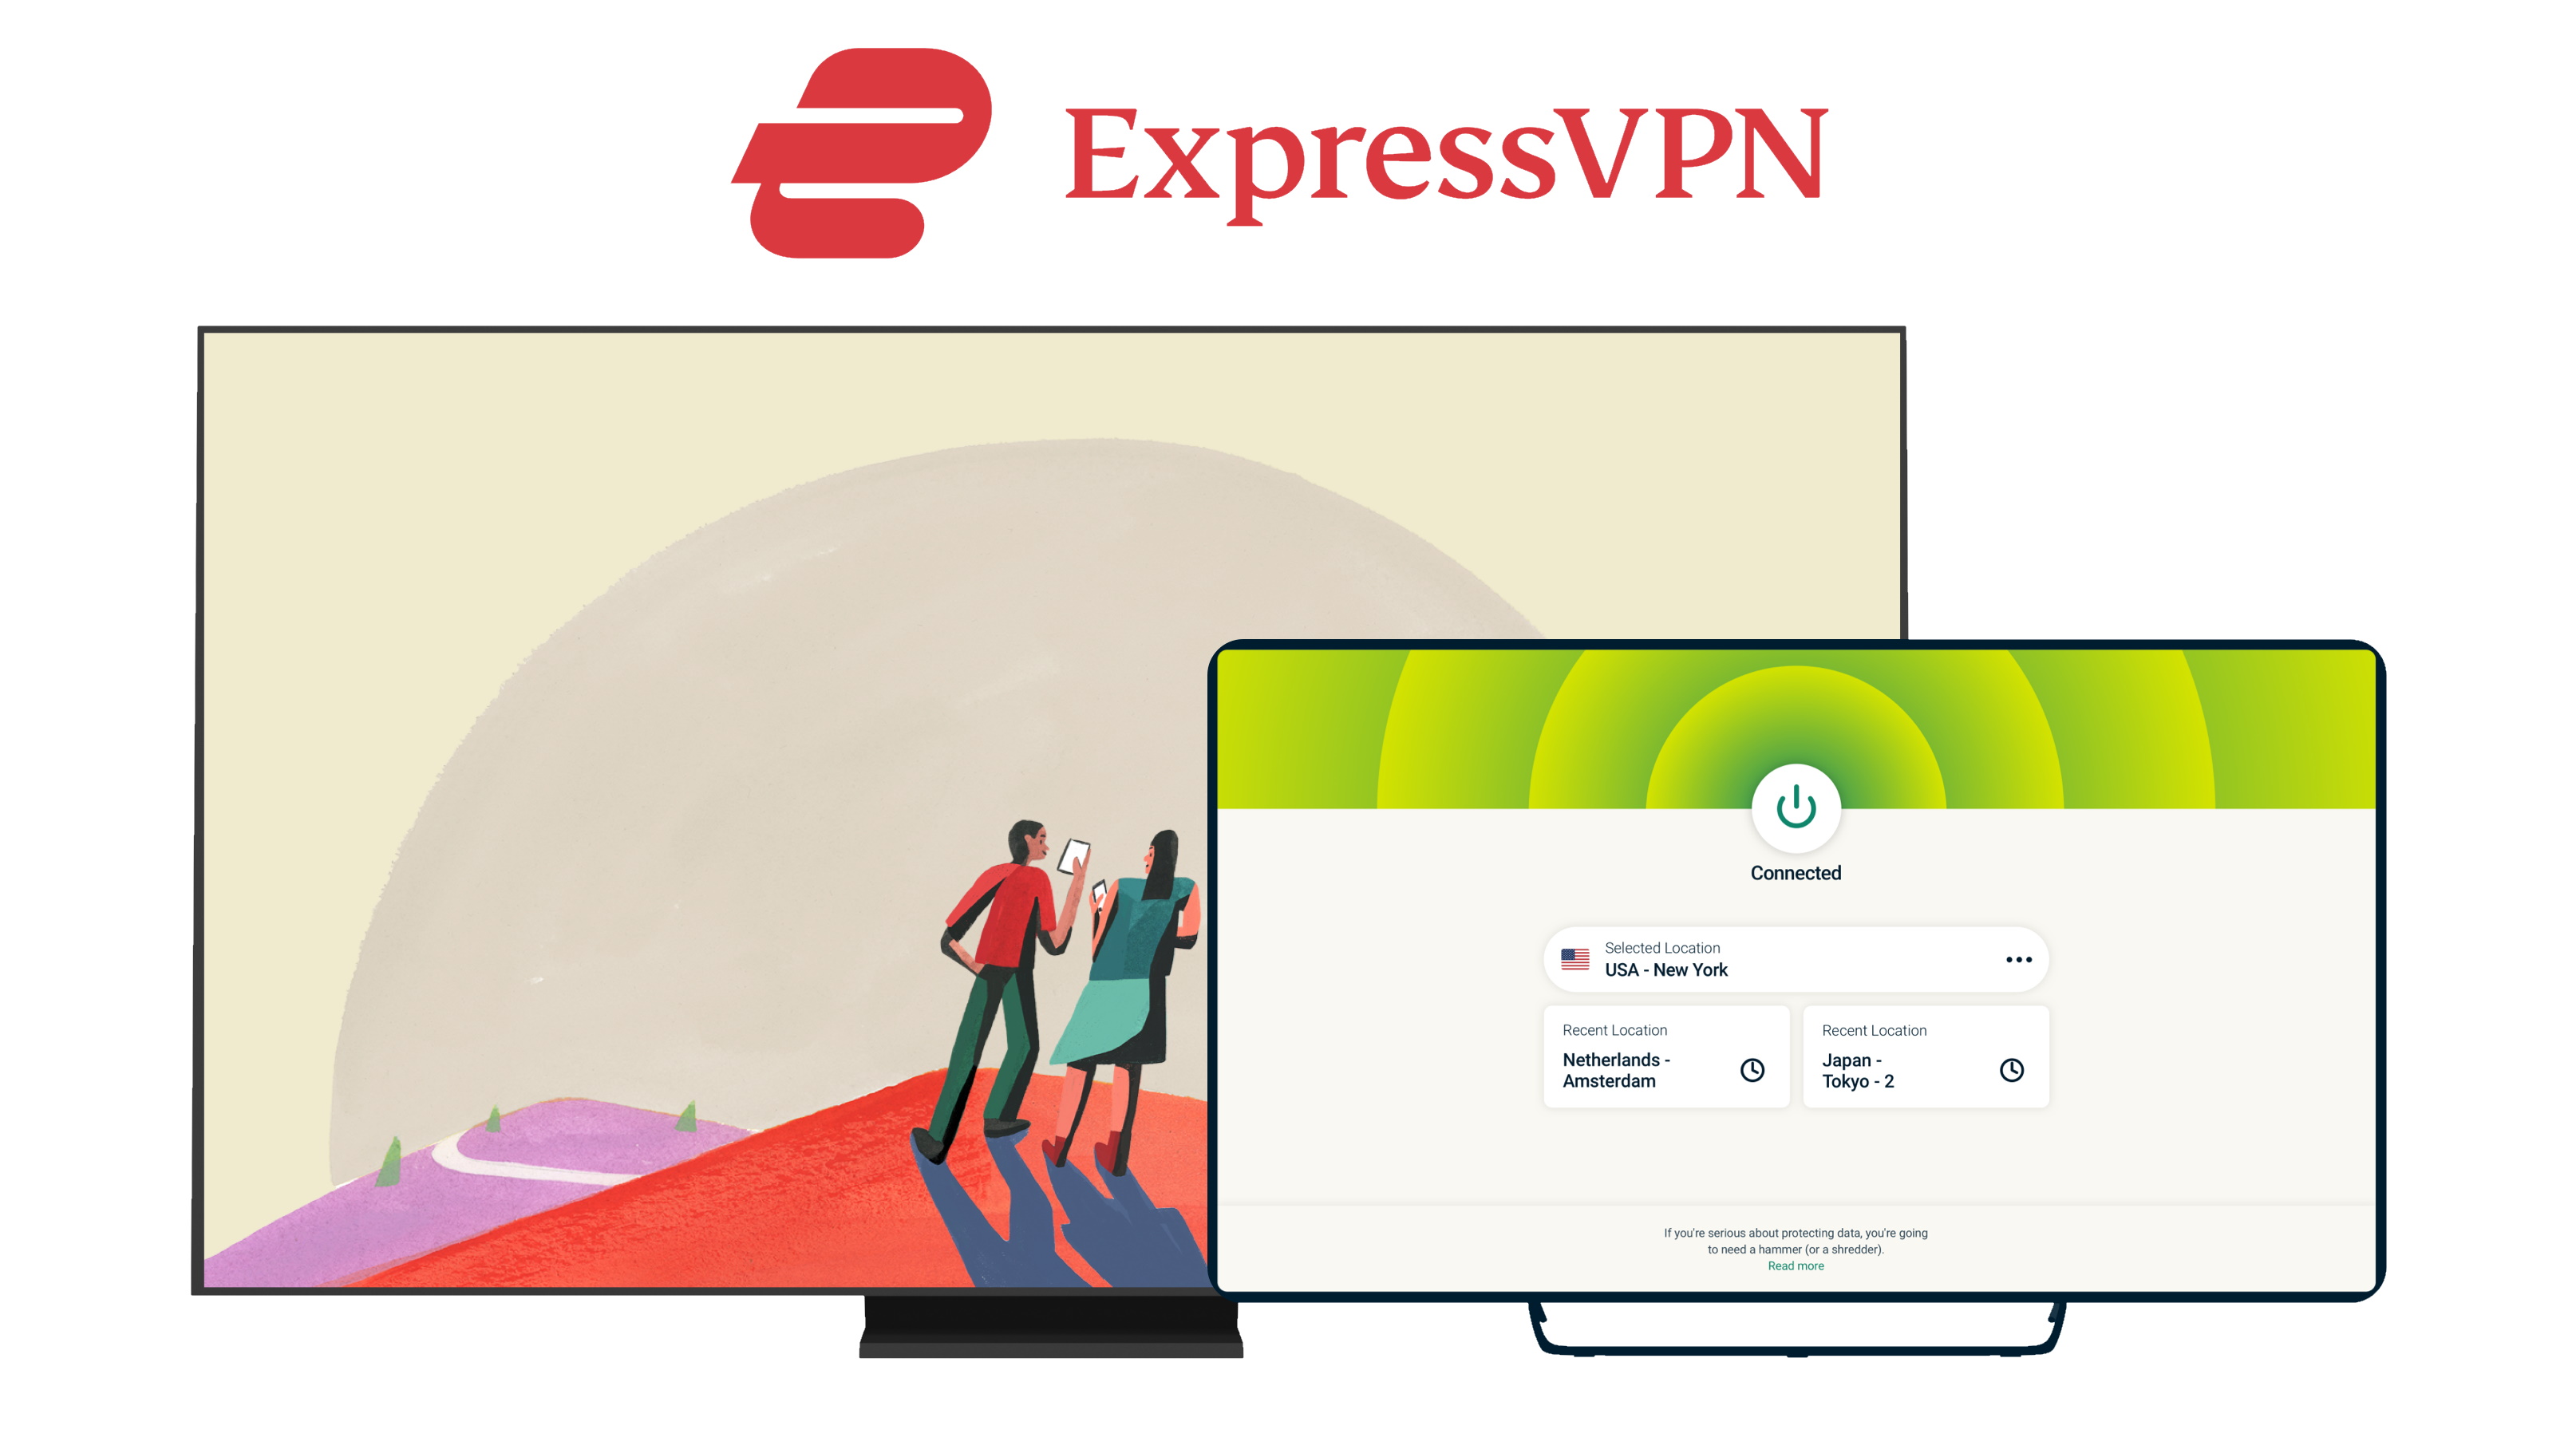 ExpressVPN interface shown working with an Amazon Fire TV Stick